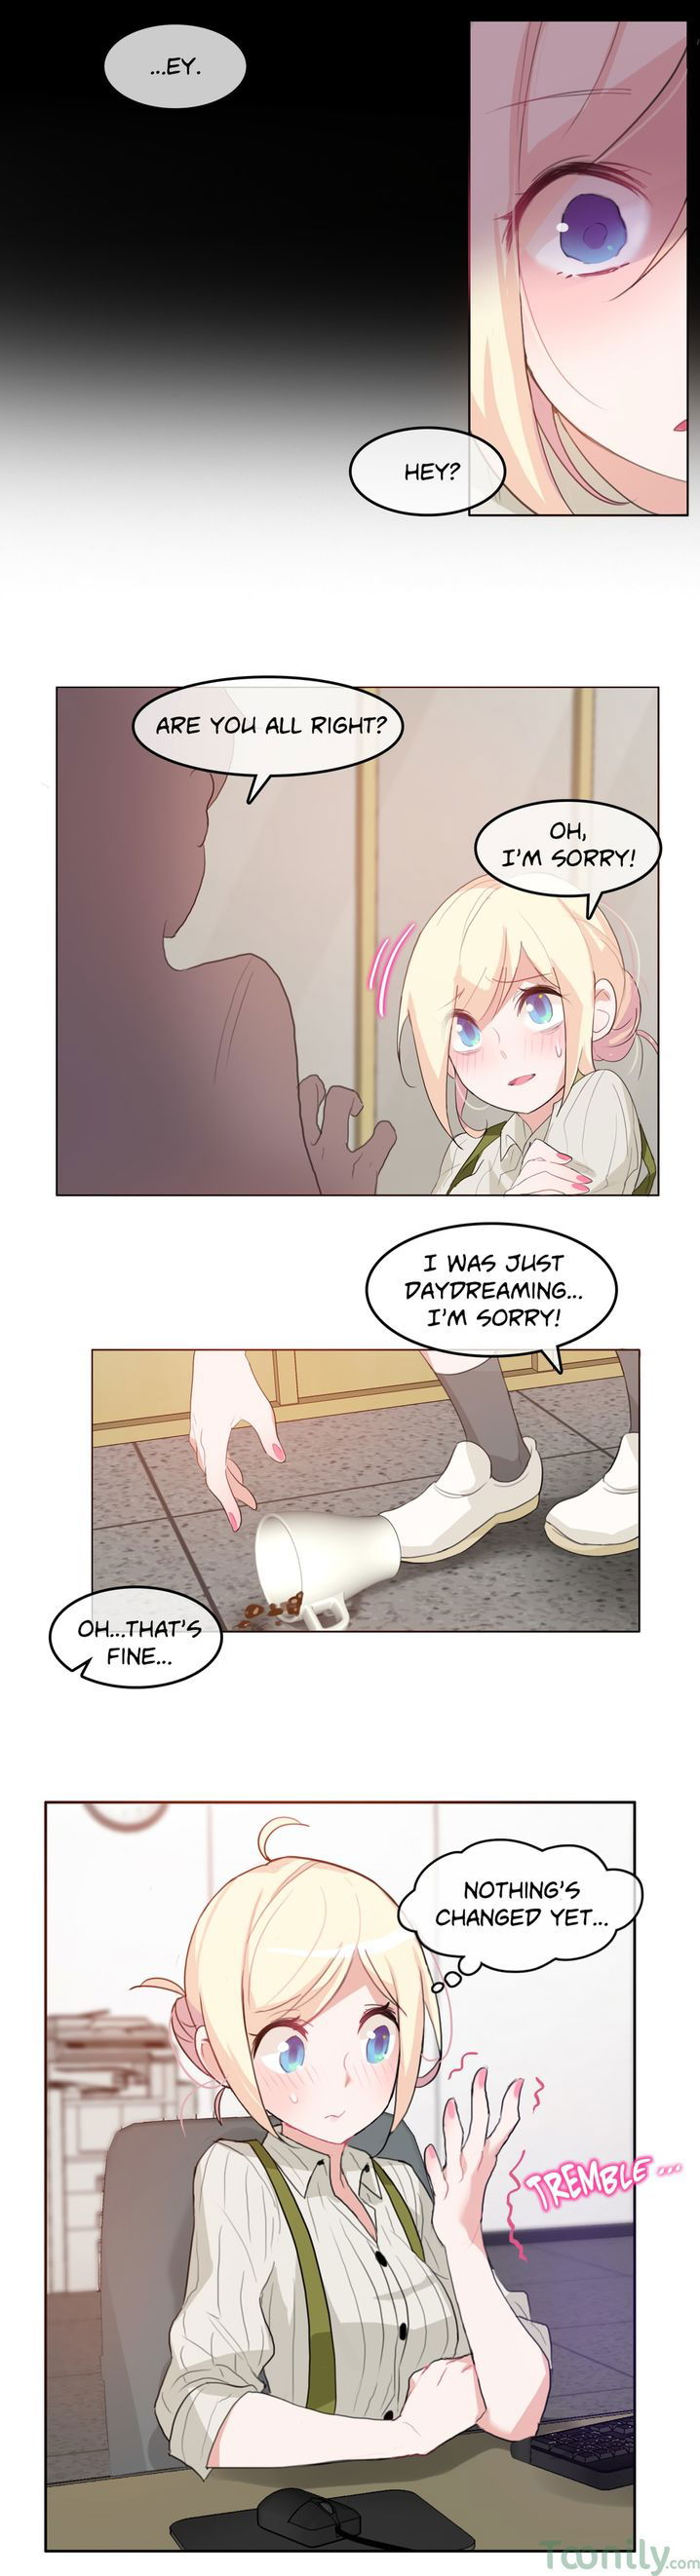 a-perverts-daily-life-chap-8-7